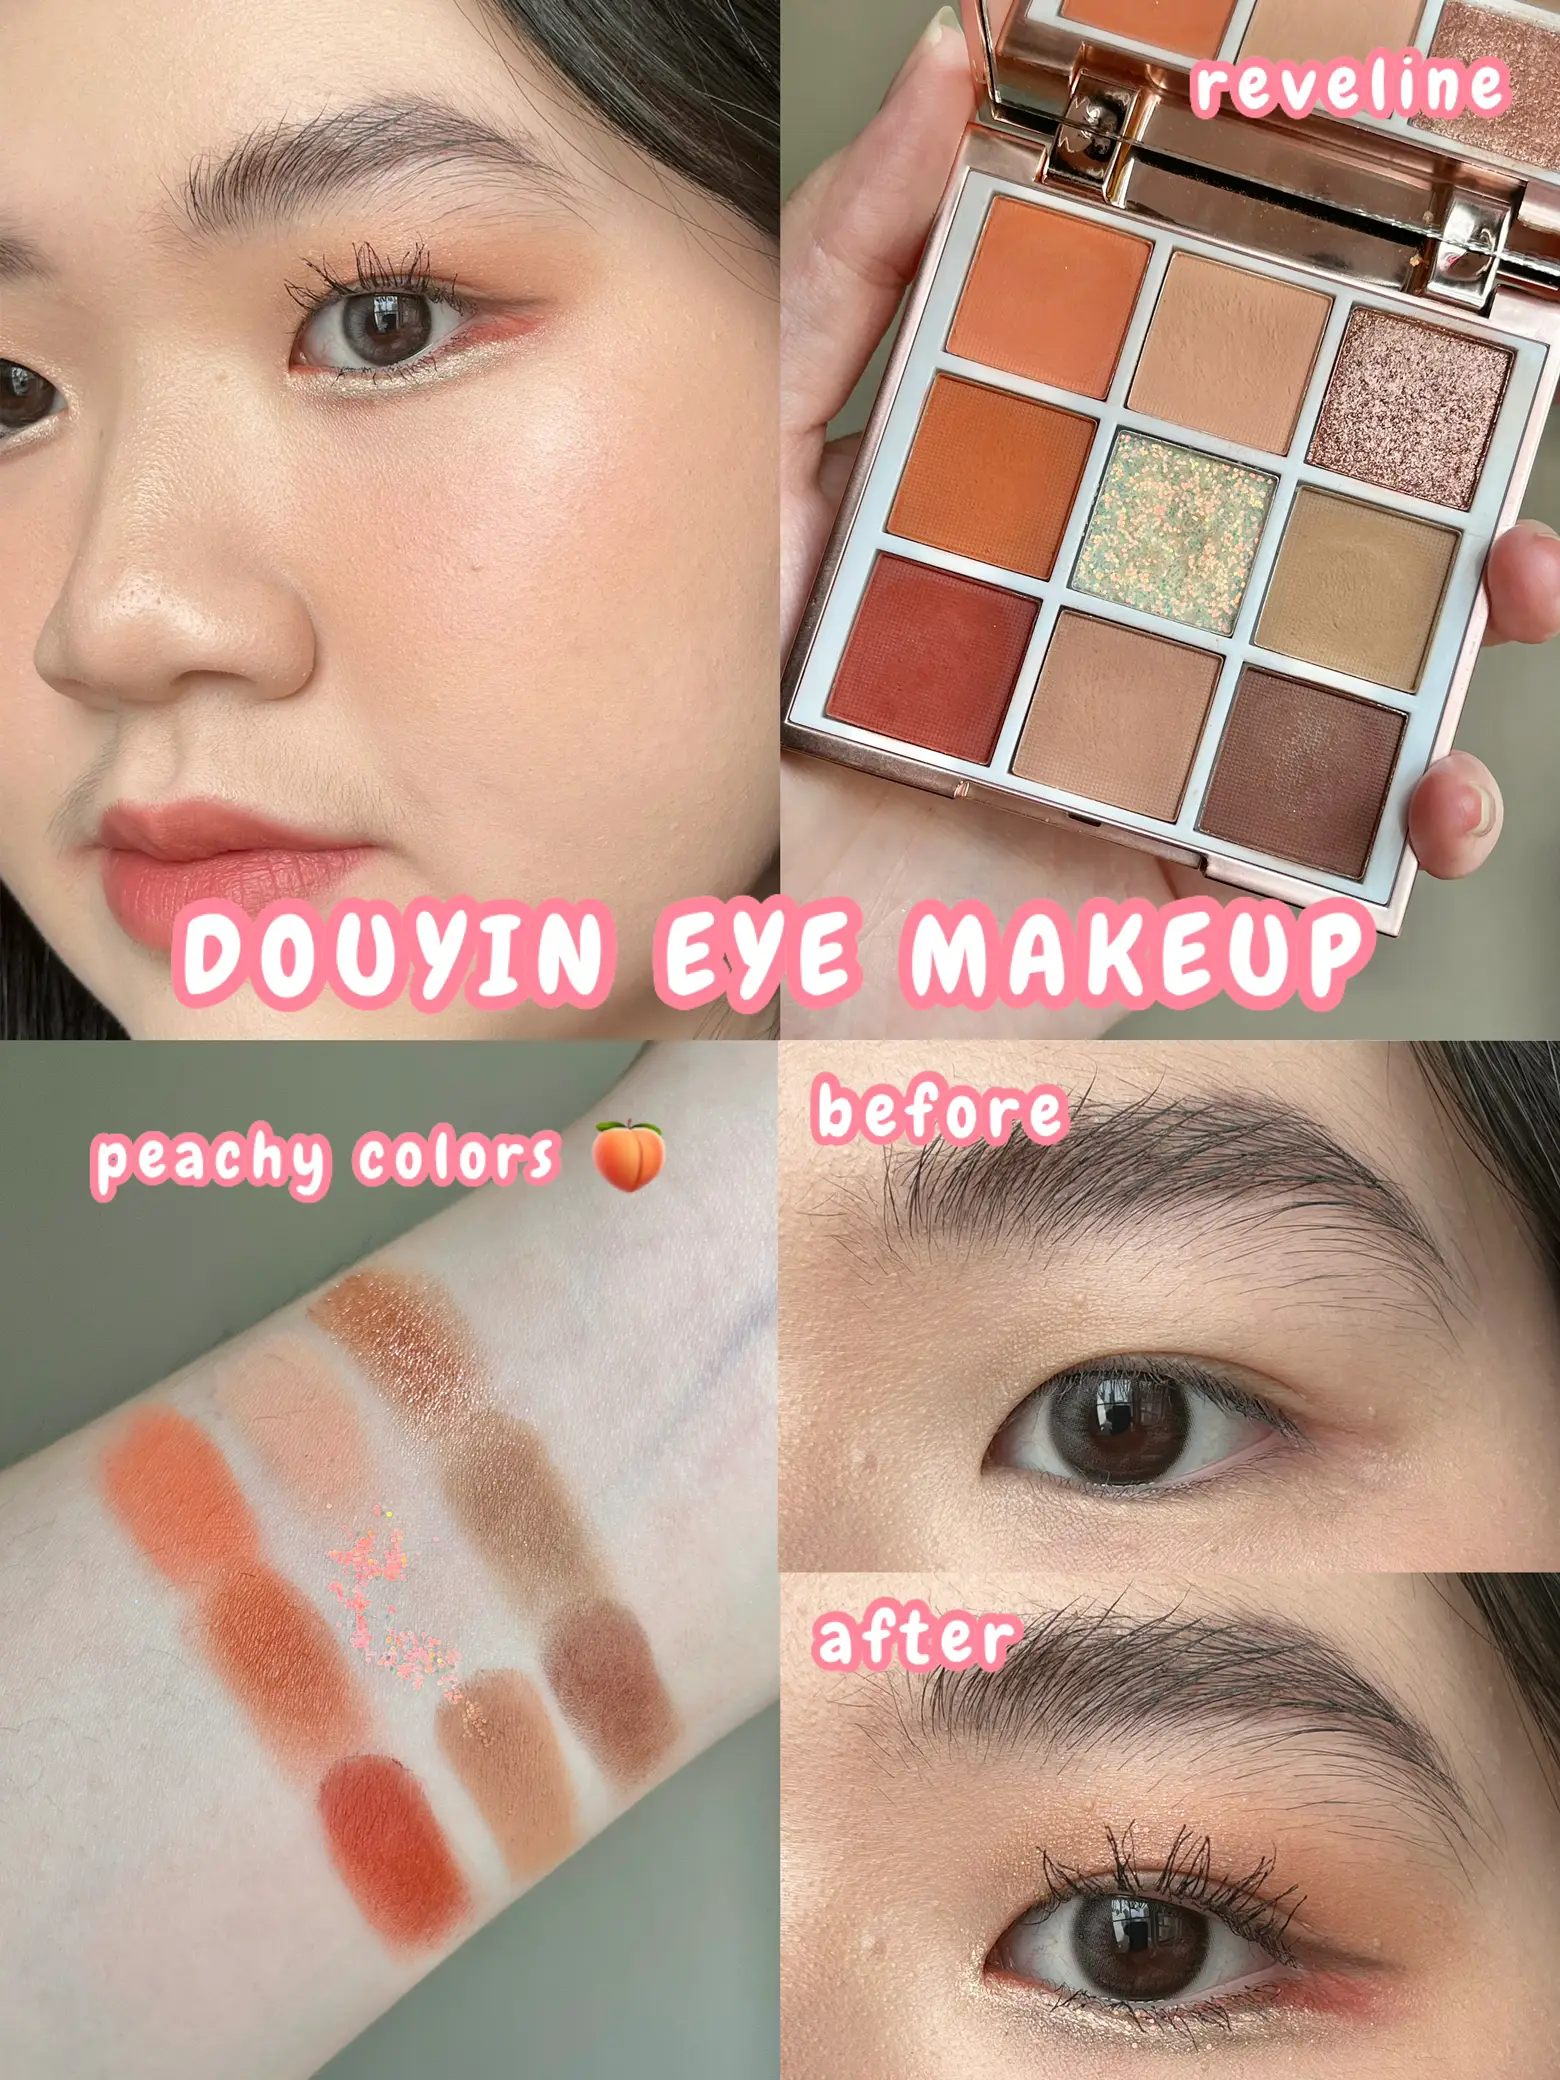 Douyin eye makeup tutorial! ?✨ | Gallery posted by Audrey Aurelie | Lemon8